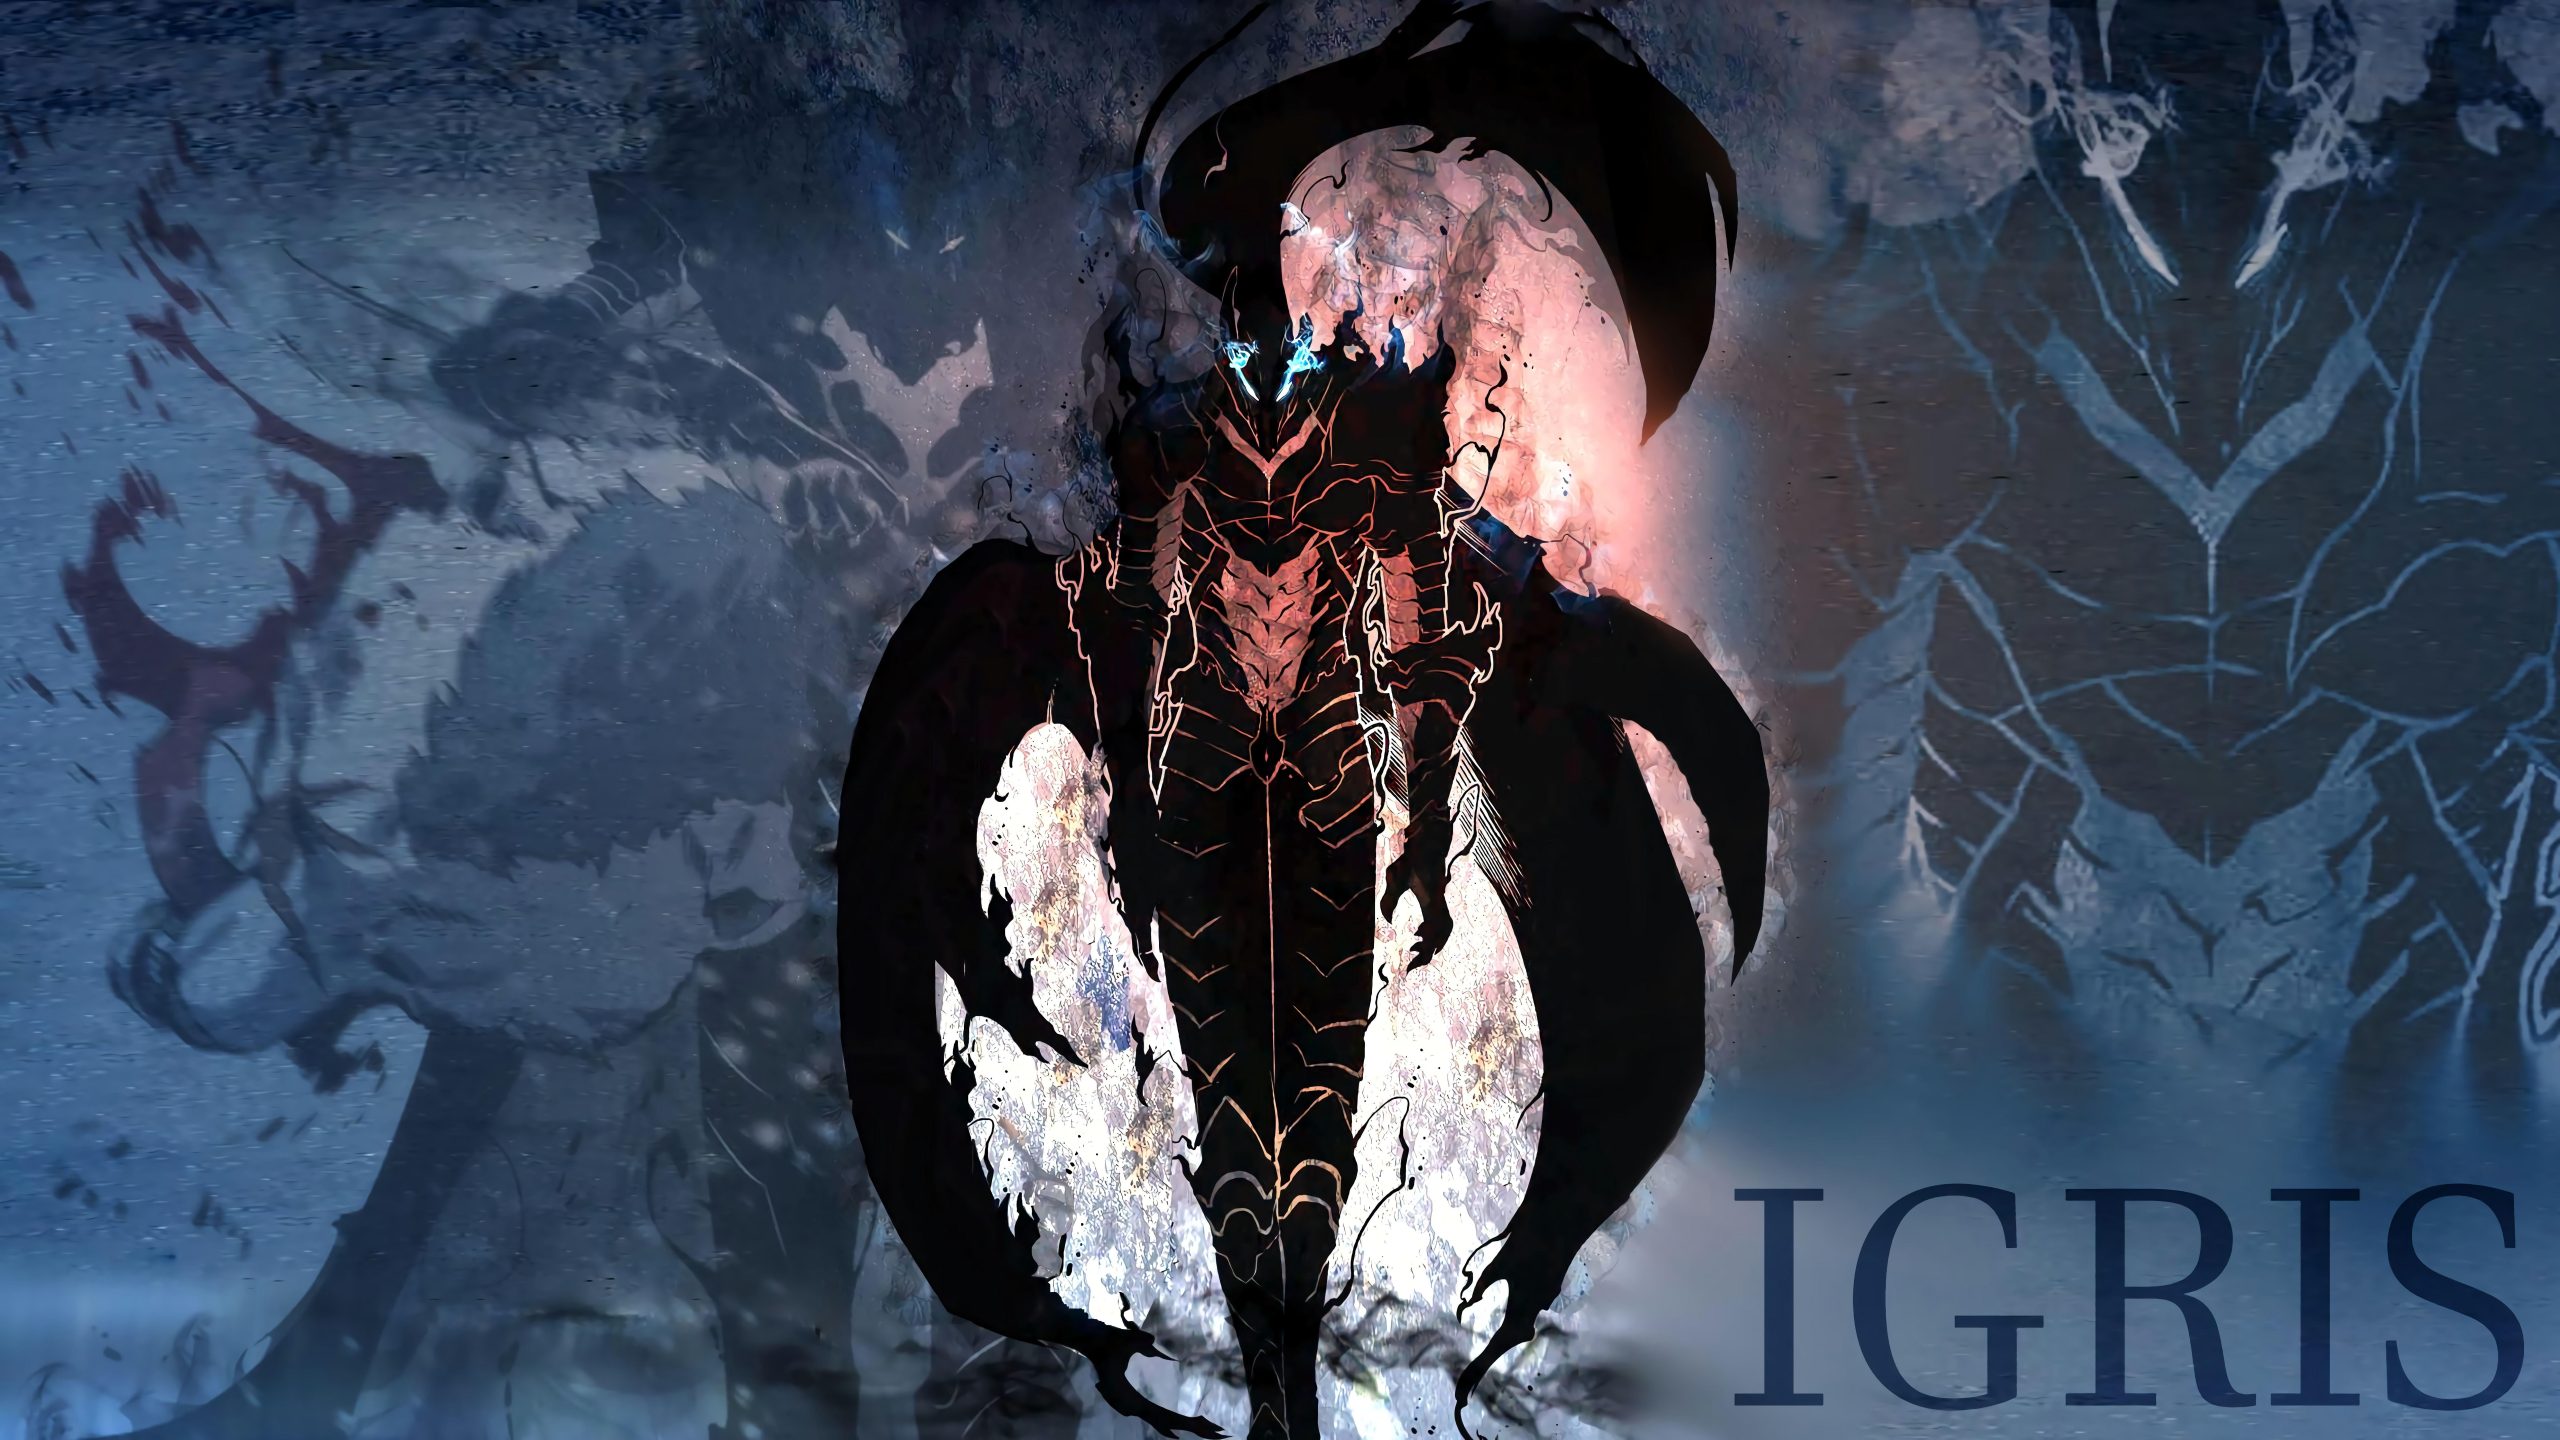 Igris Solo Leveling Wallpaper For Pc, Igris Solo Leveling, Anime